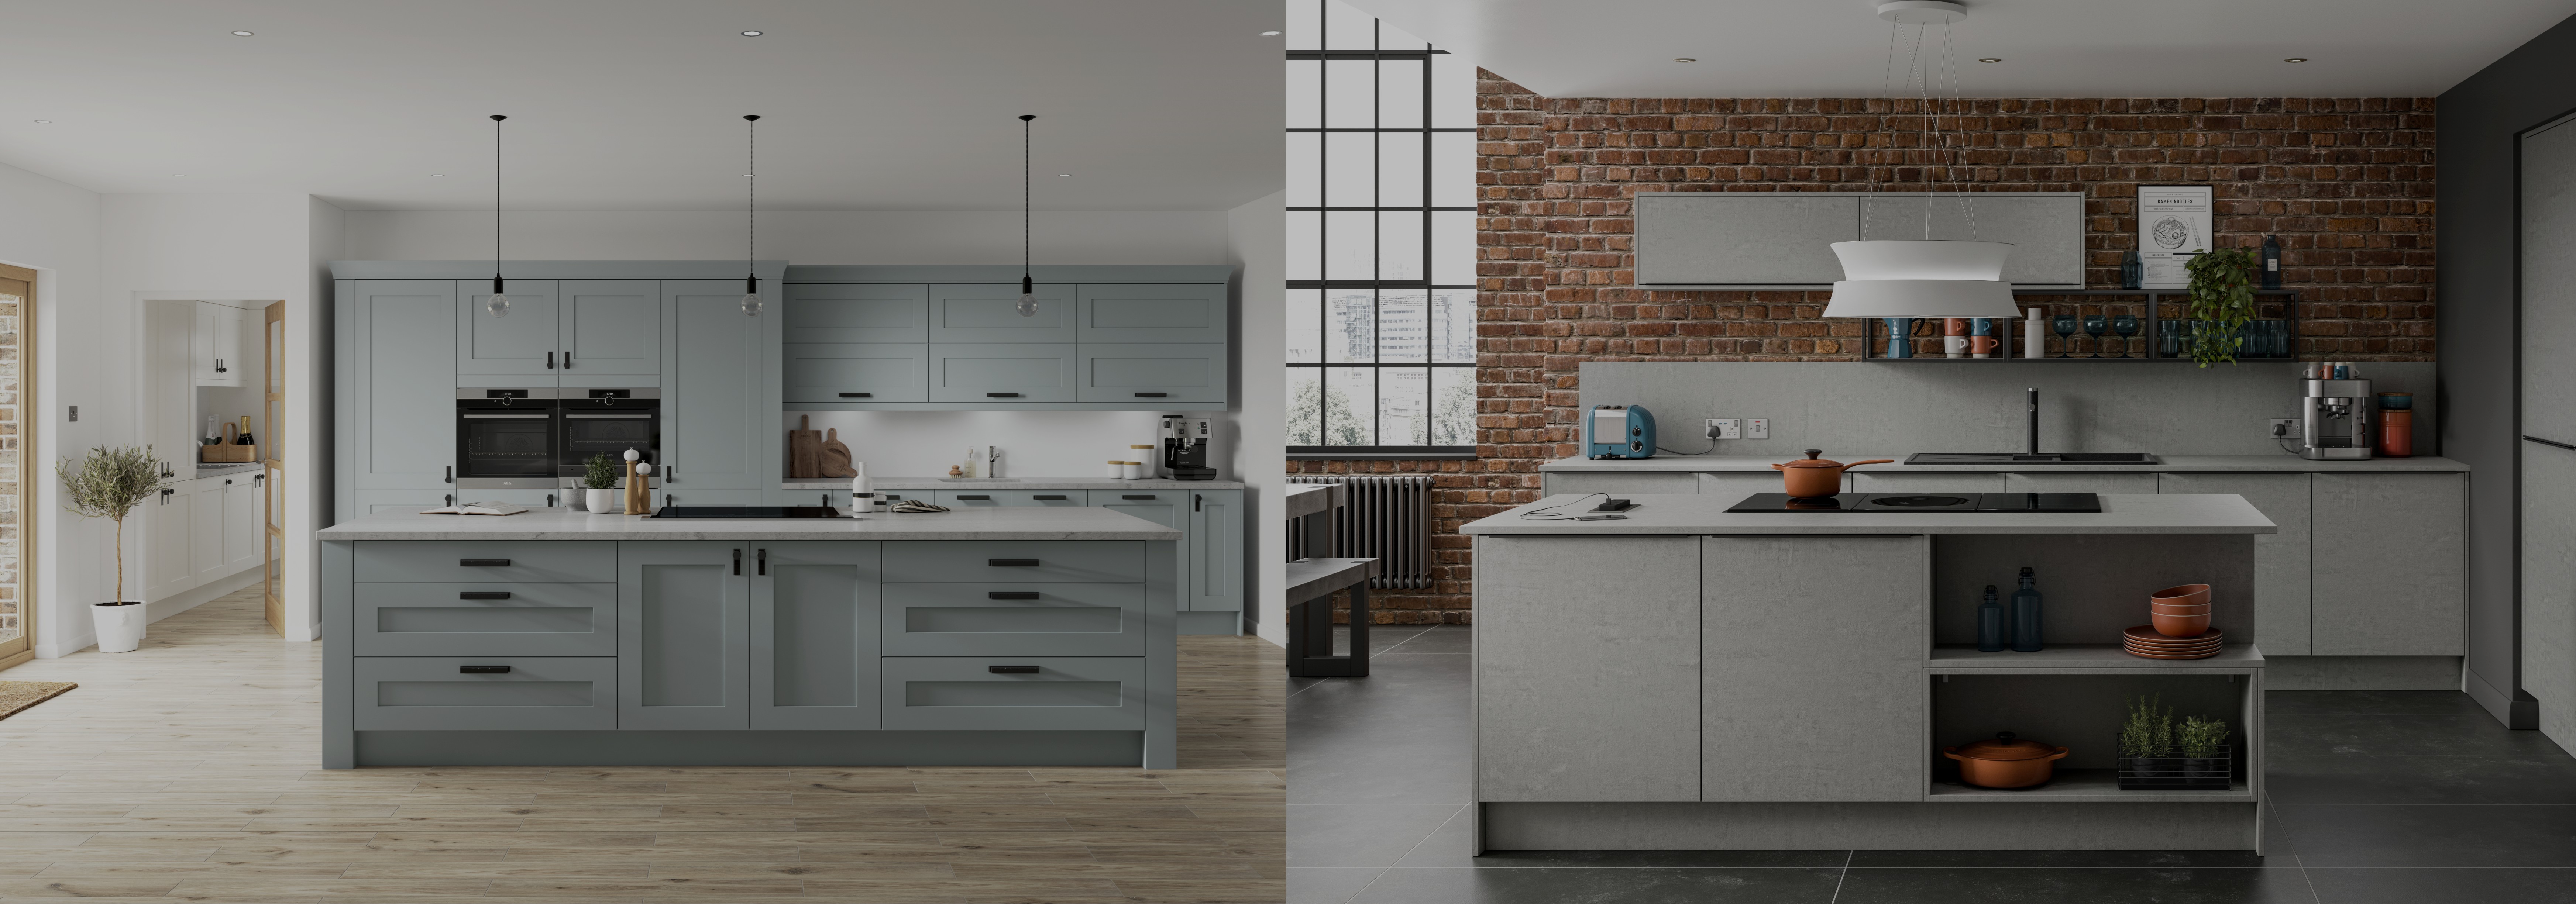 Two different kitchens of modern and classic sensibilities